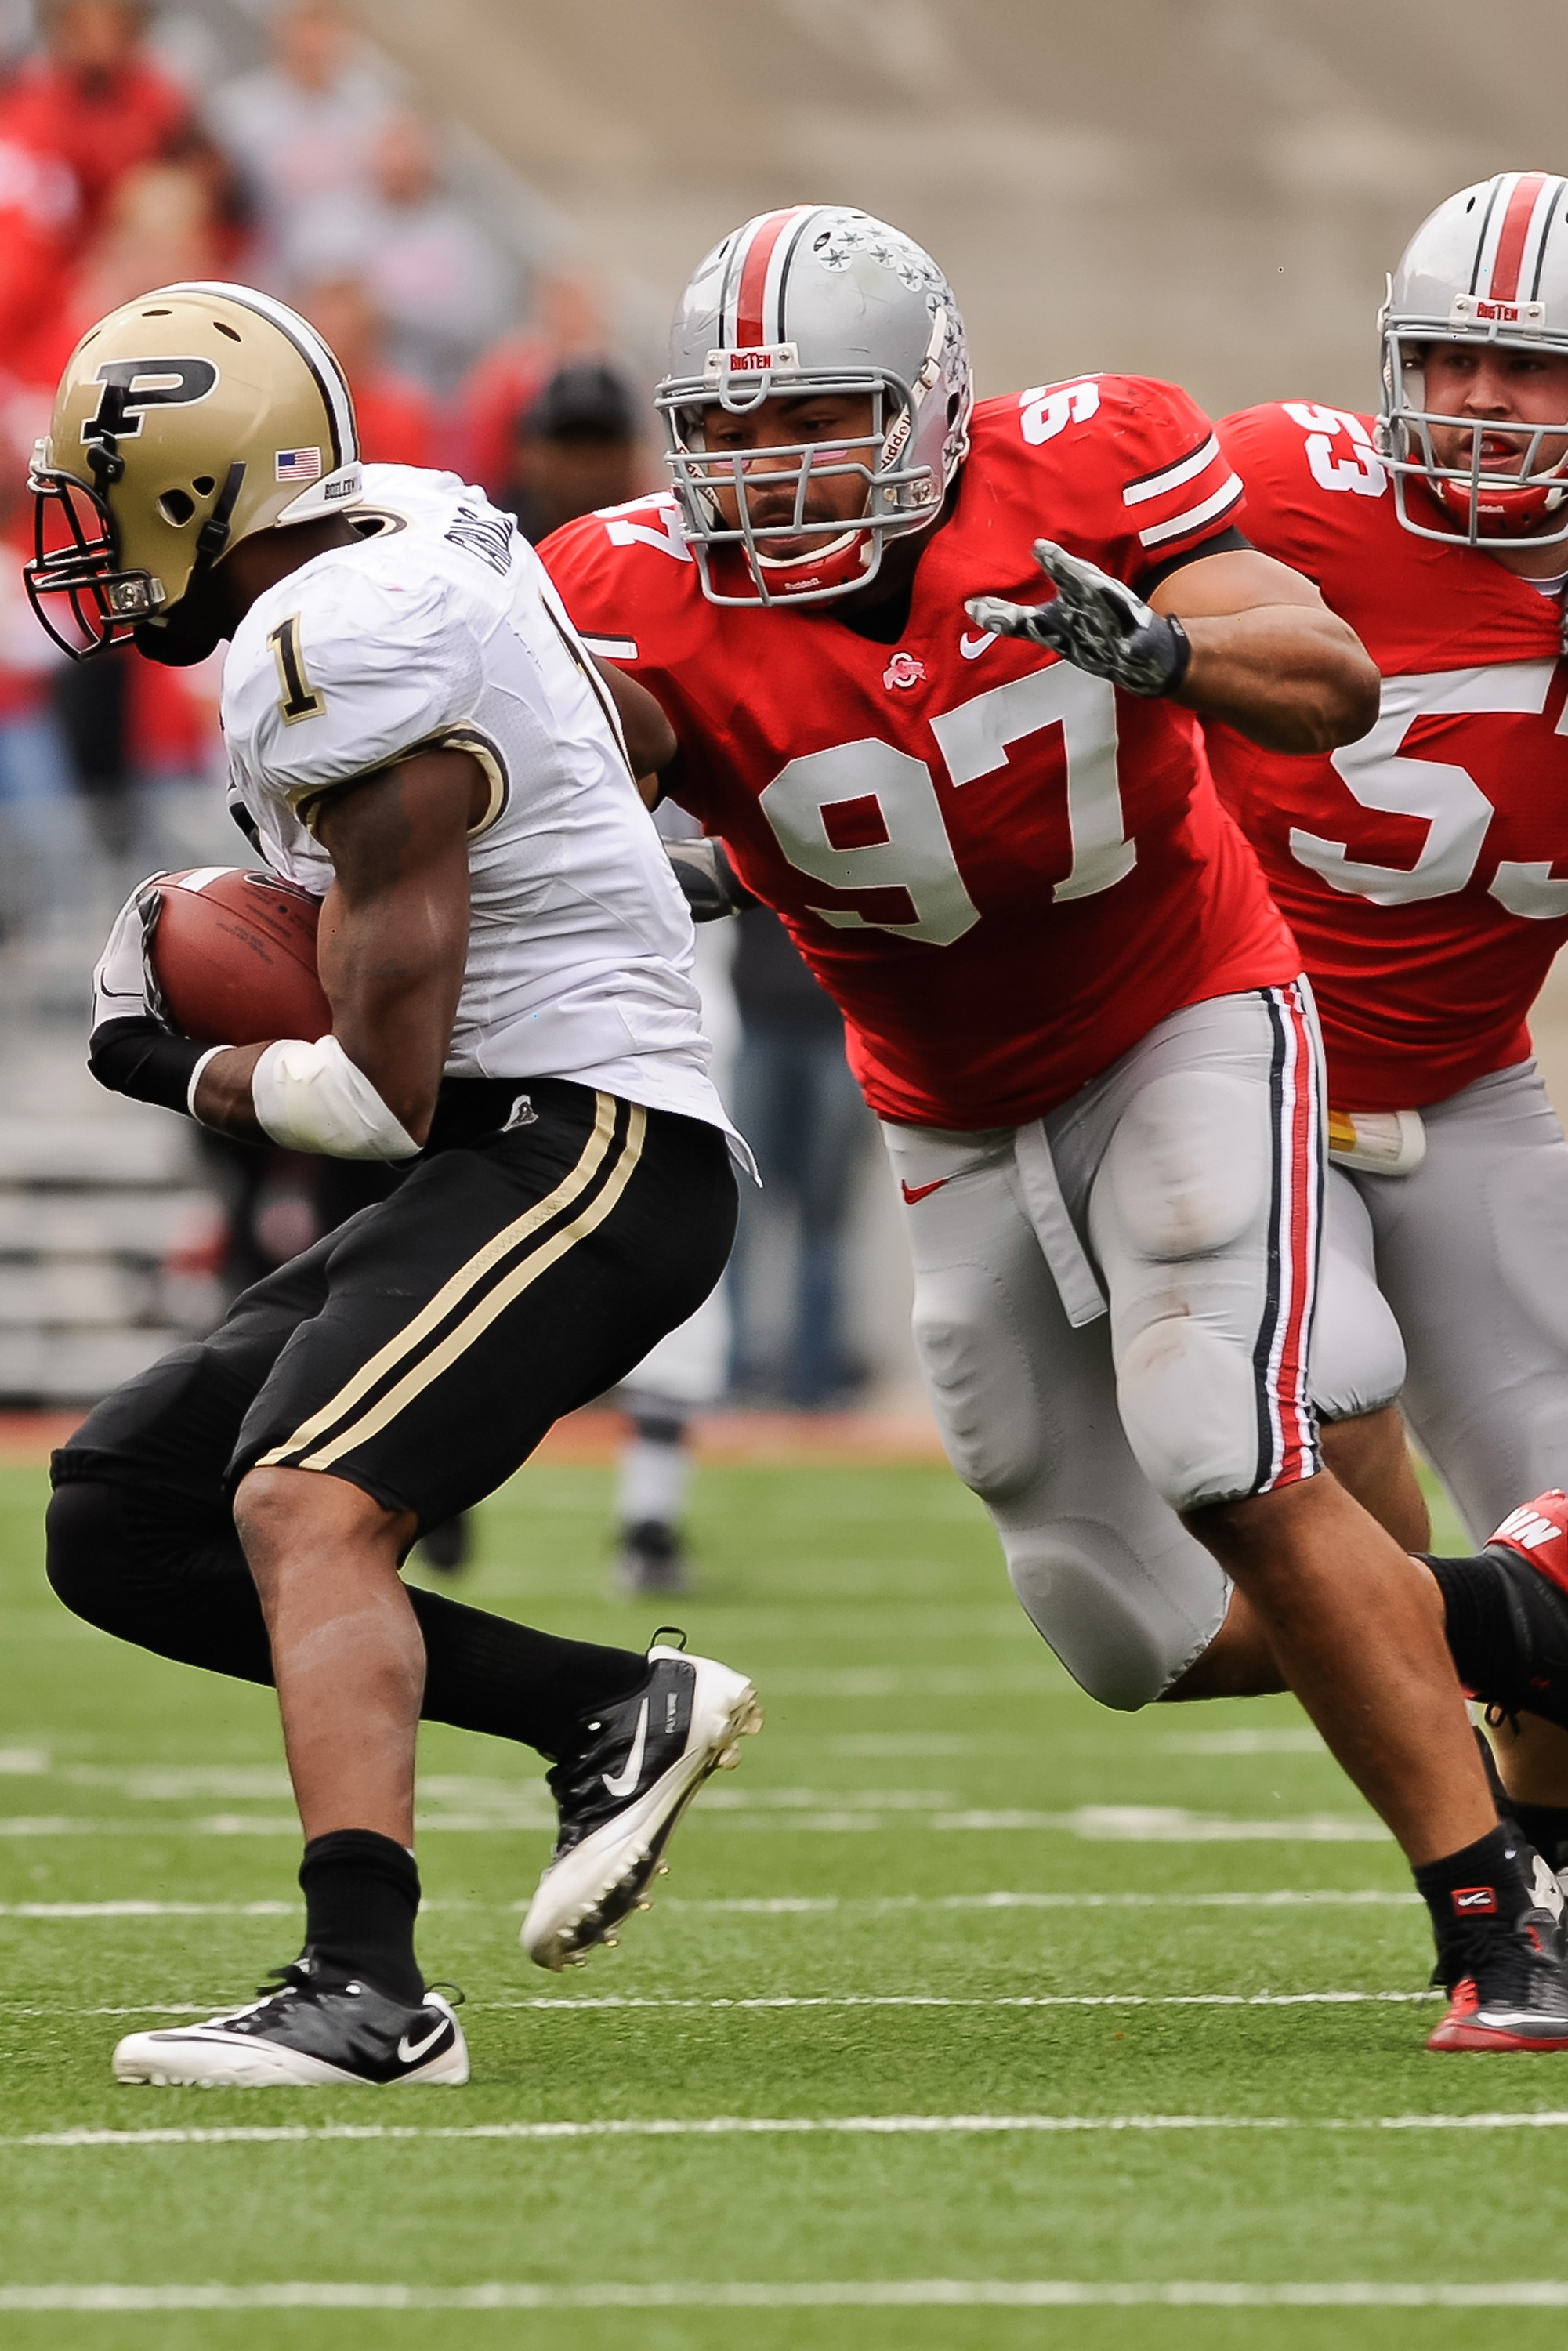 COLUMBUS, OH - OCTOBER 23:  Cameron Heyward #97 of the Ohio State Buckeyes chases down ballcarrier Keith Carlos #1 of the Purdue Boilermakers at Ohio Stadium on October 23, 2010 in Columbus, Ohio.  (Photo by Jamie Sabau/Getty Images)